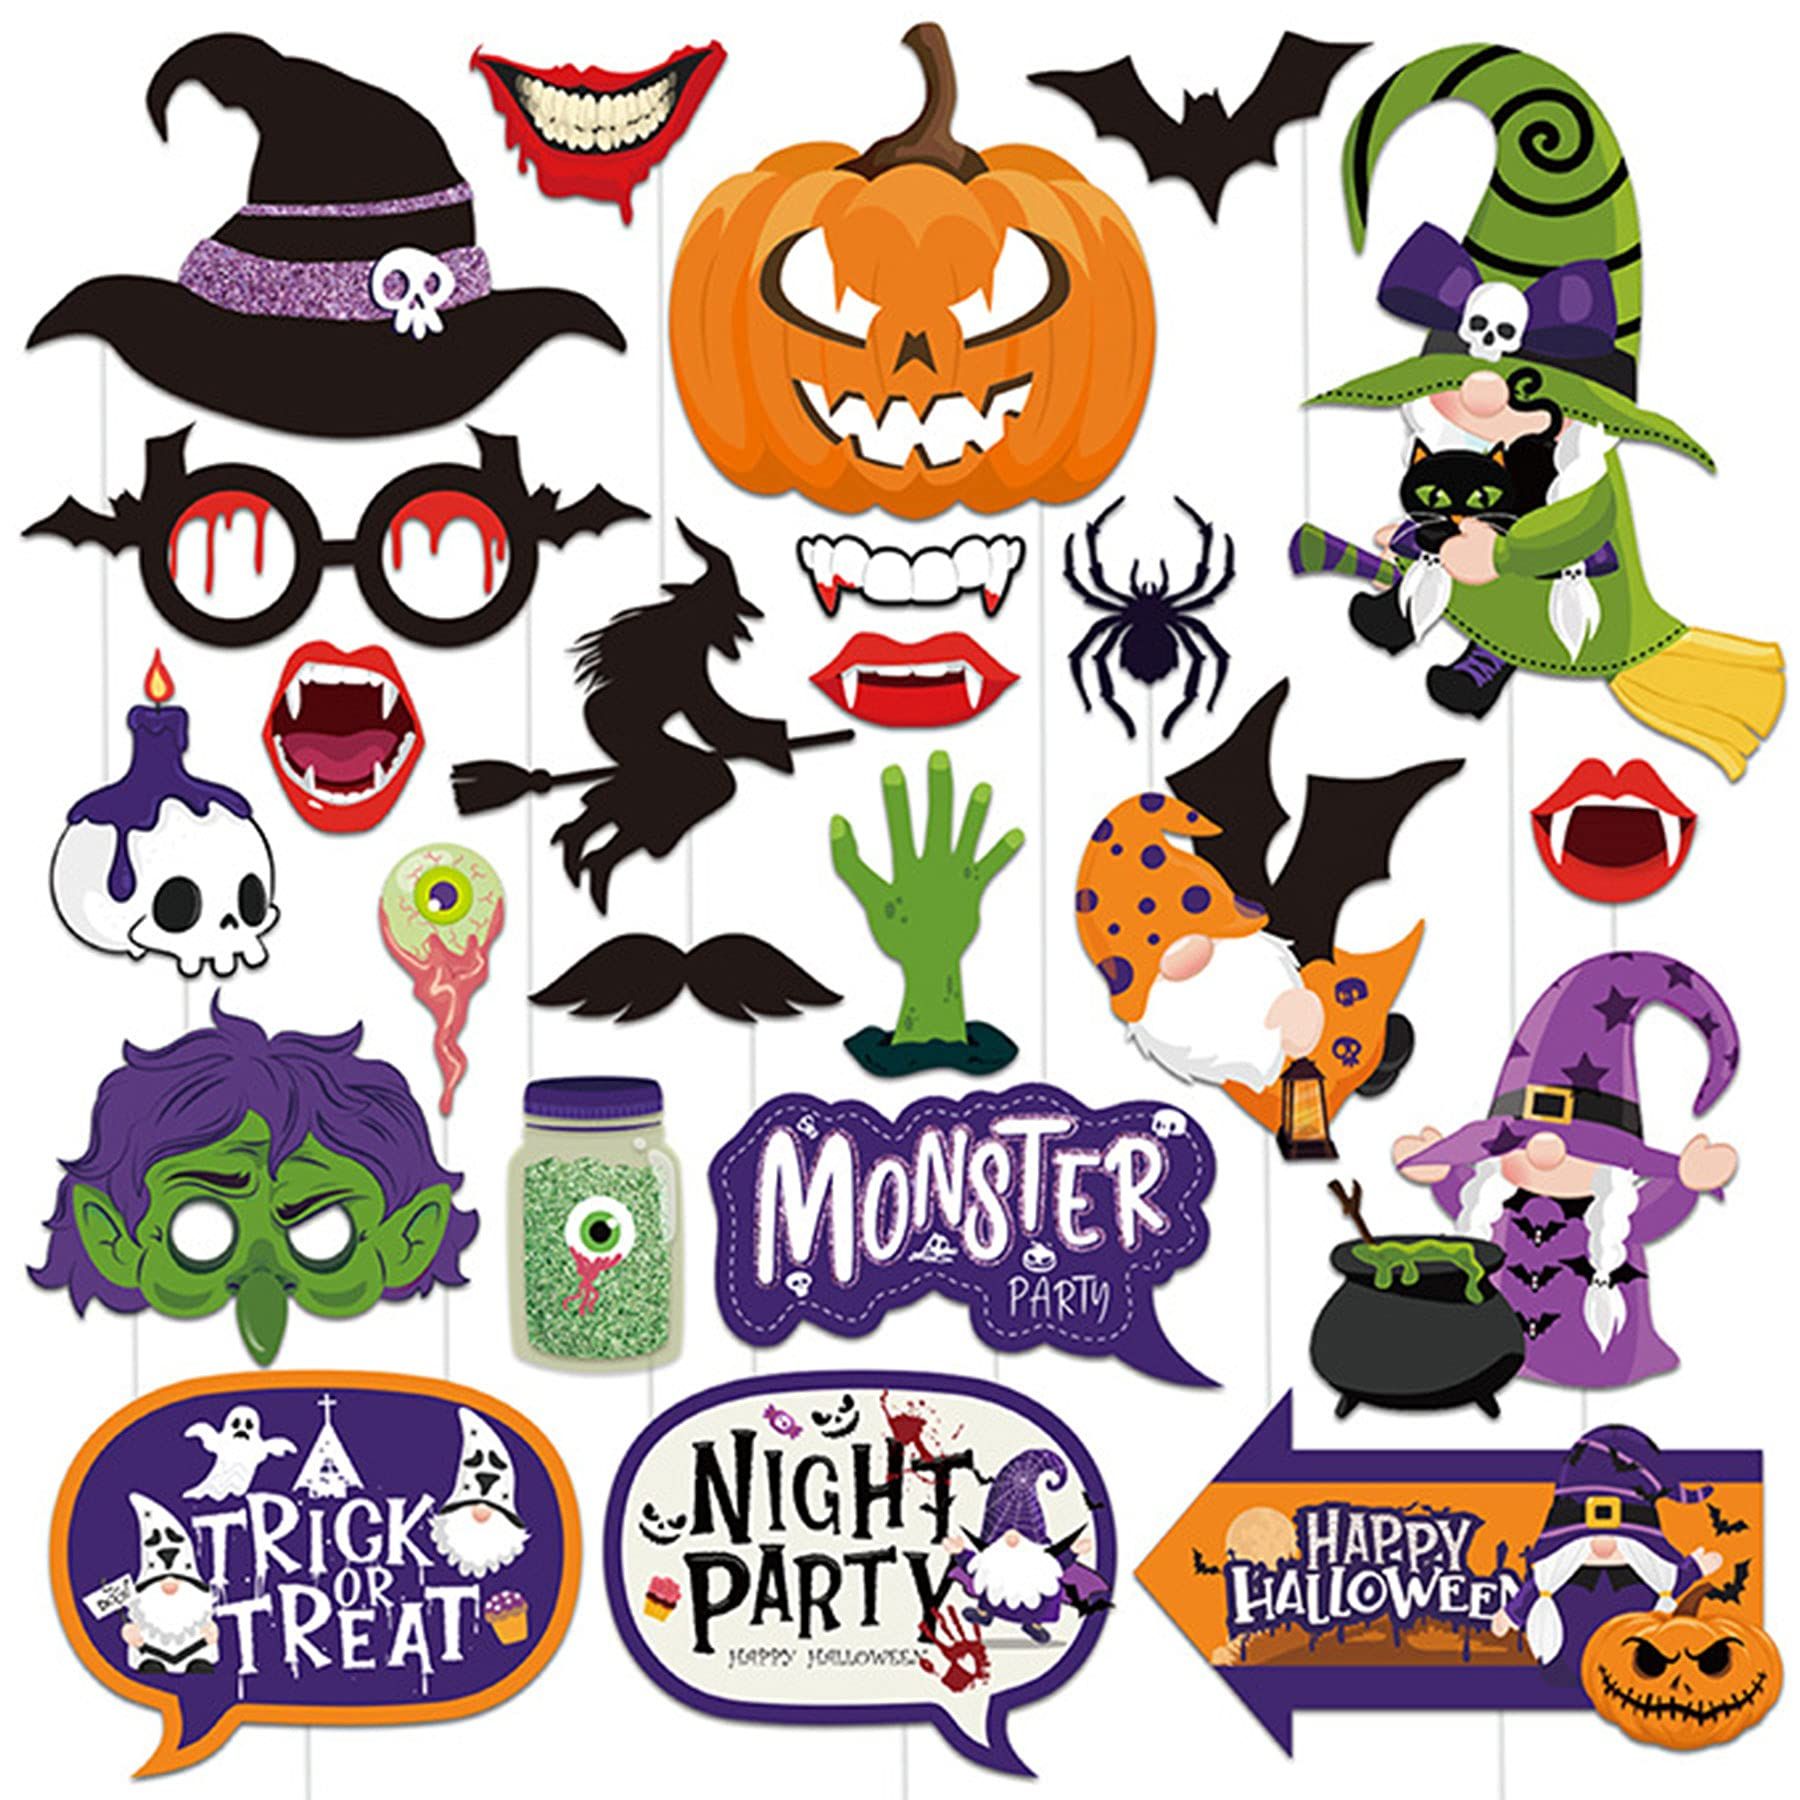 2021 Halloween Large Photo Booth Props(23pcs) for Halloween Party Supplies, Creepy Costume Props wit | Amazon (US)